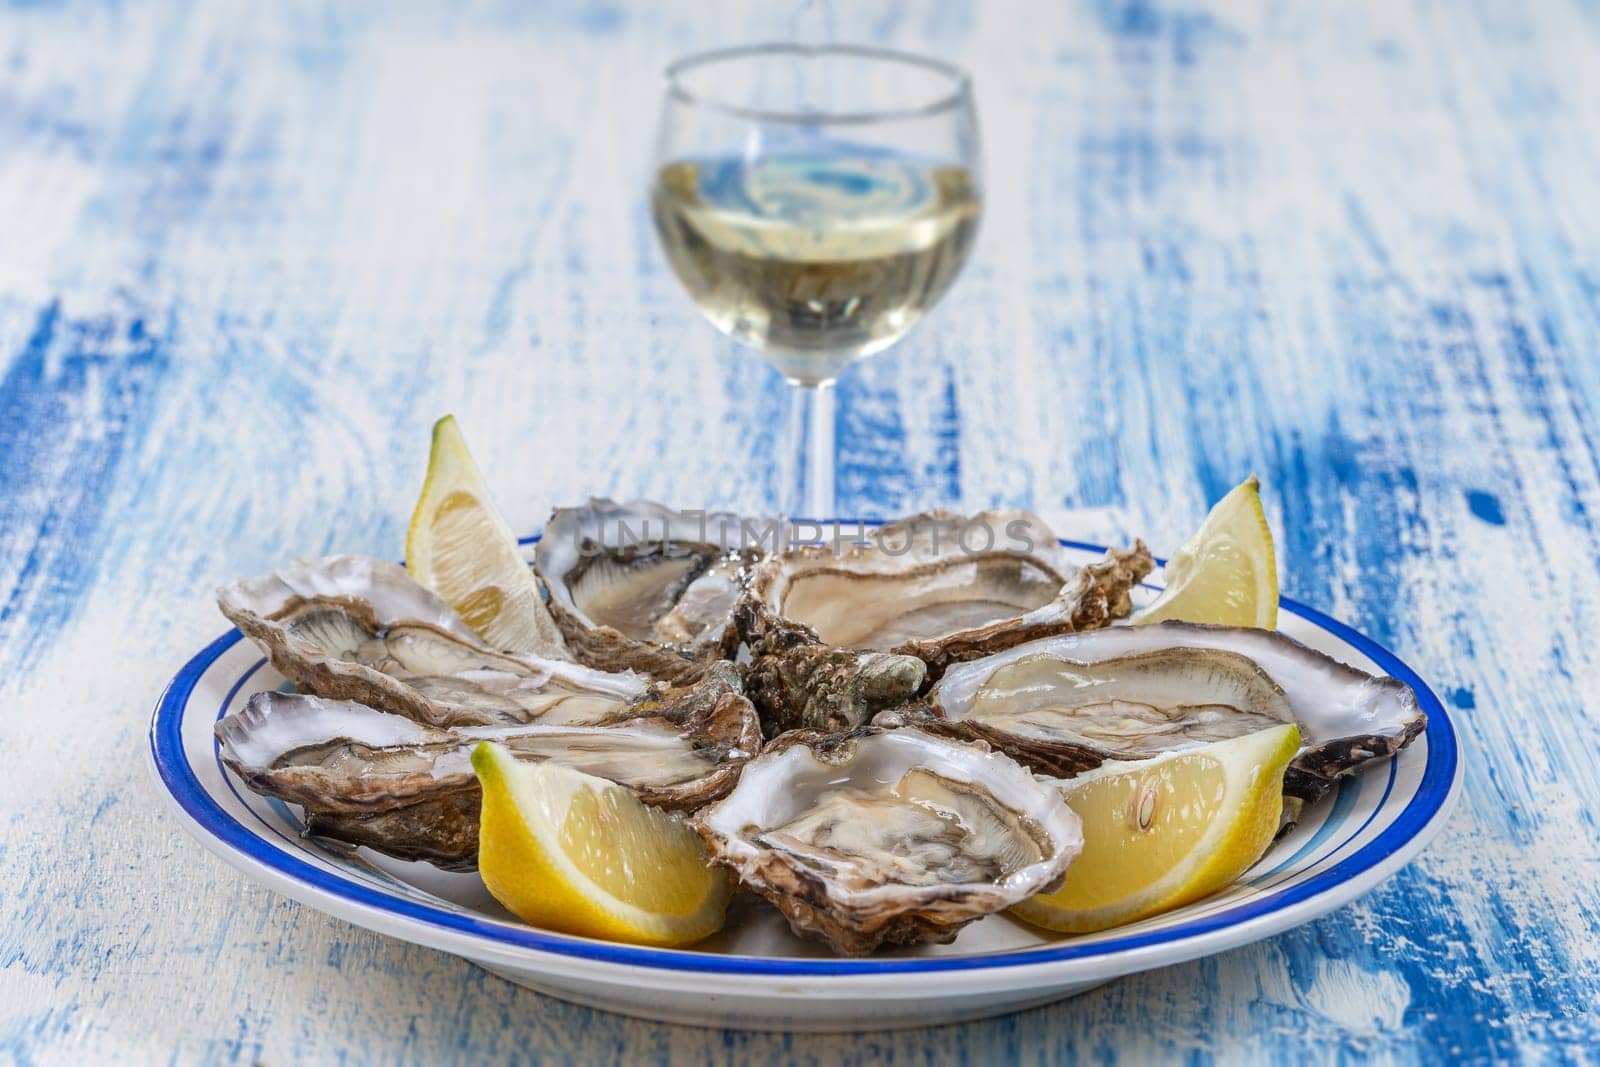 Oysters and glass of white wine in a restaurant wooden table background